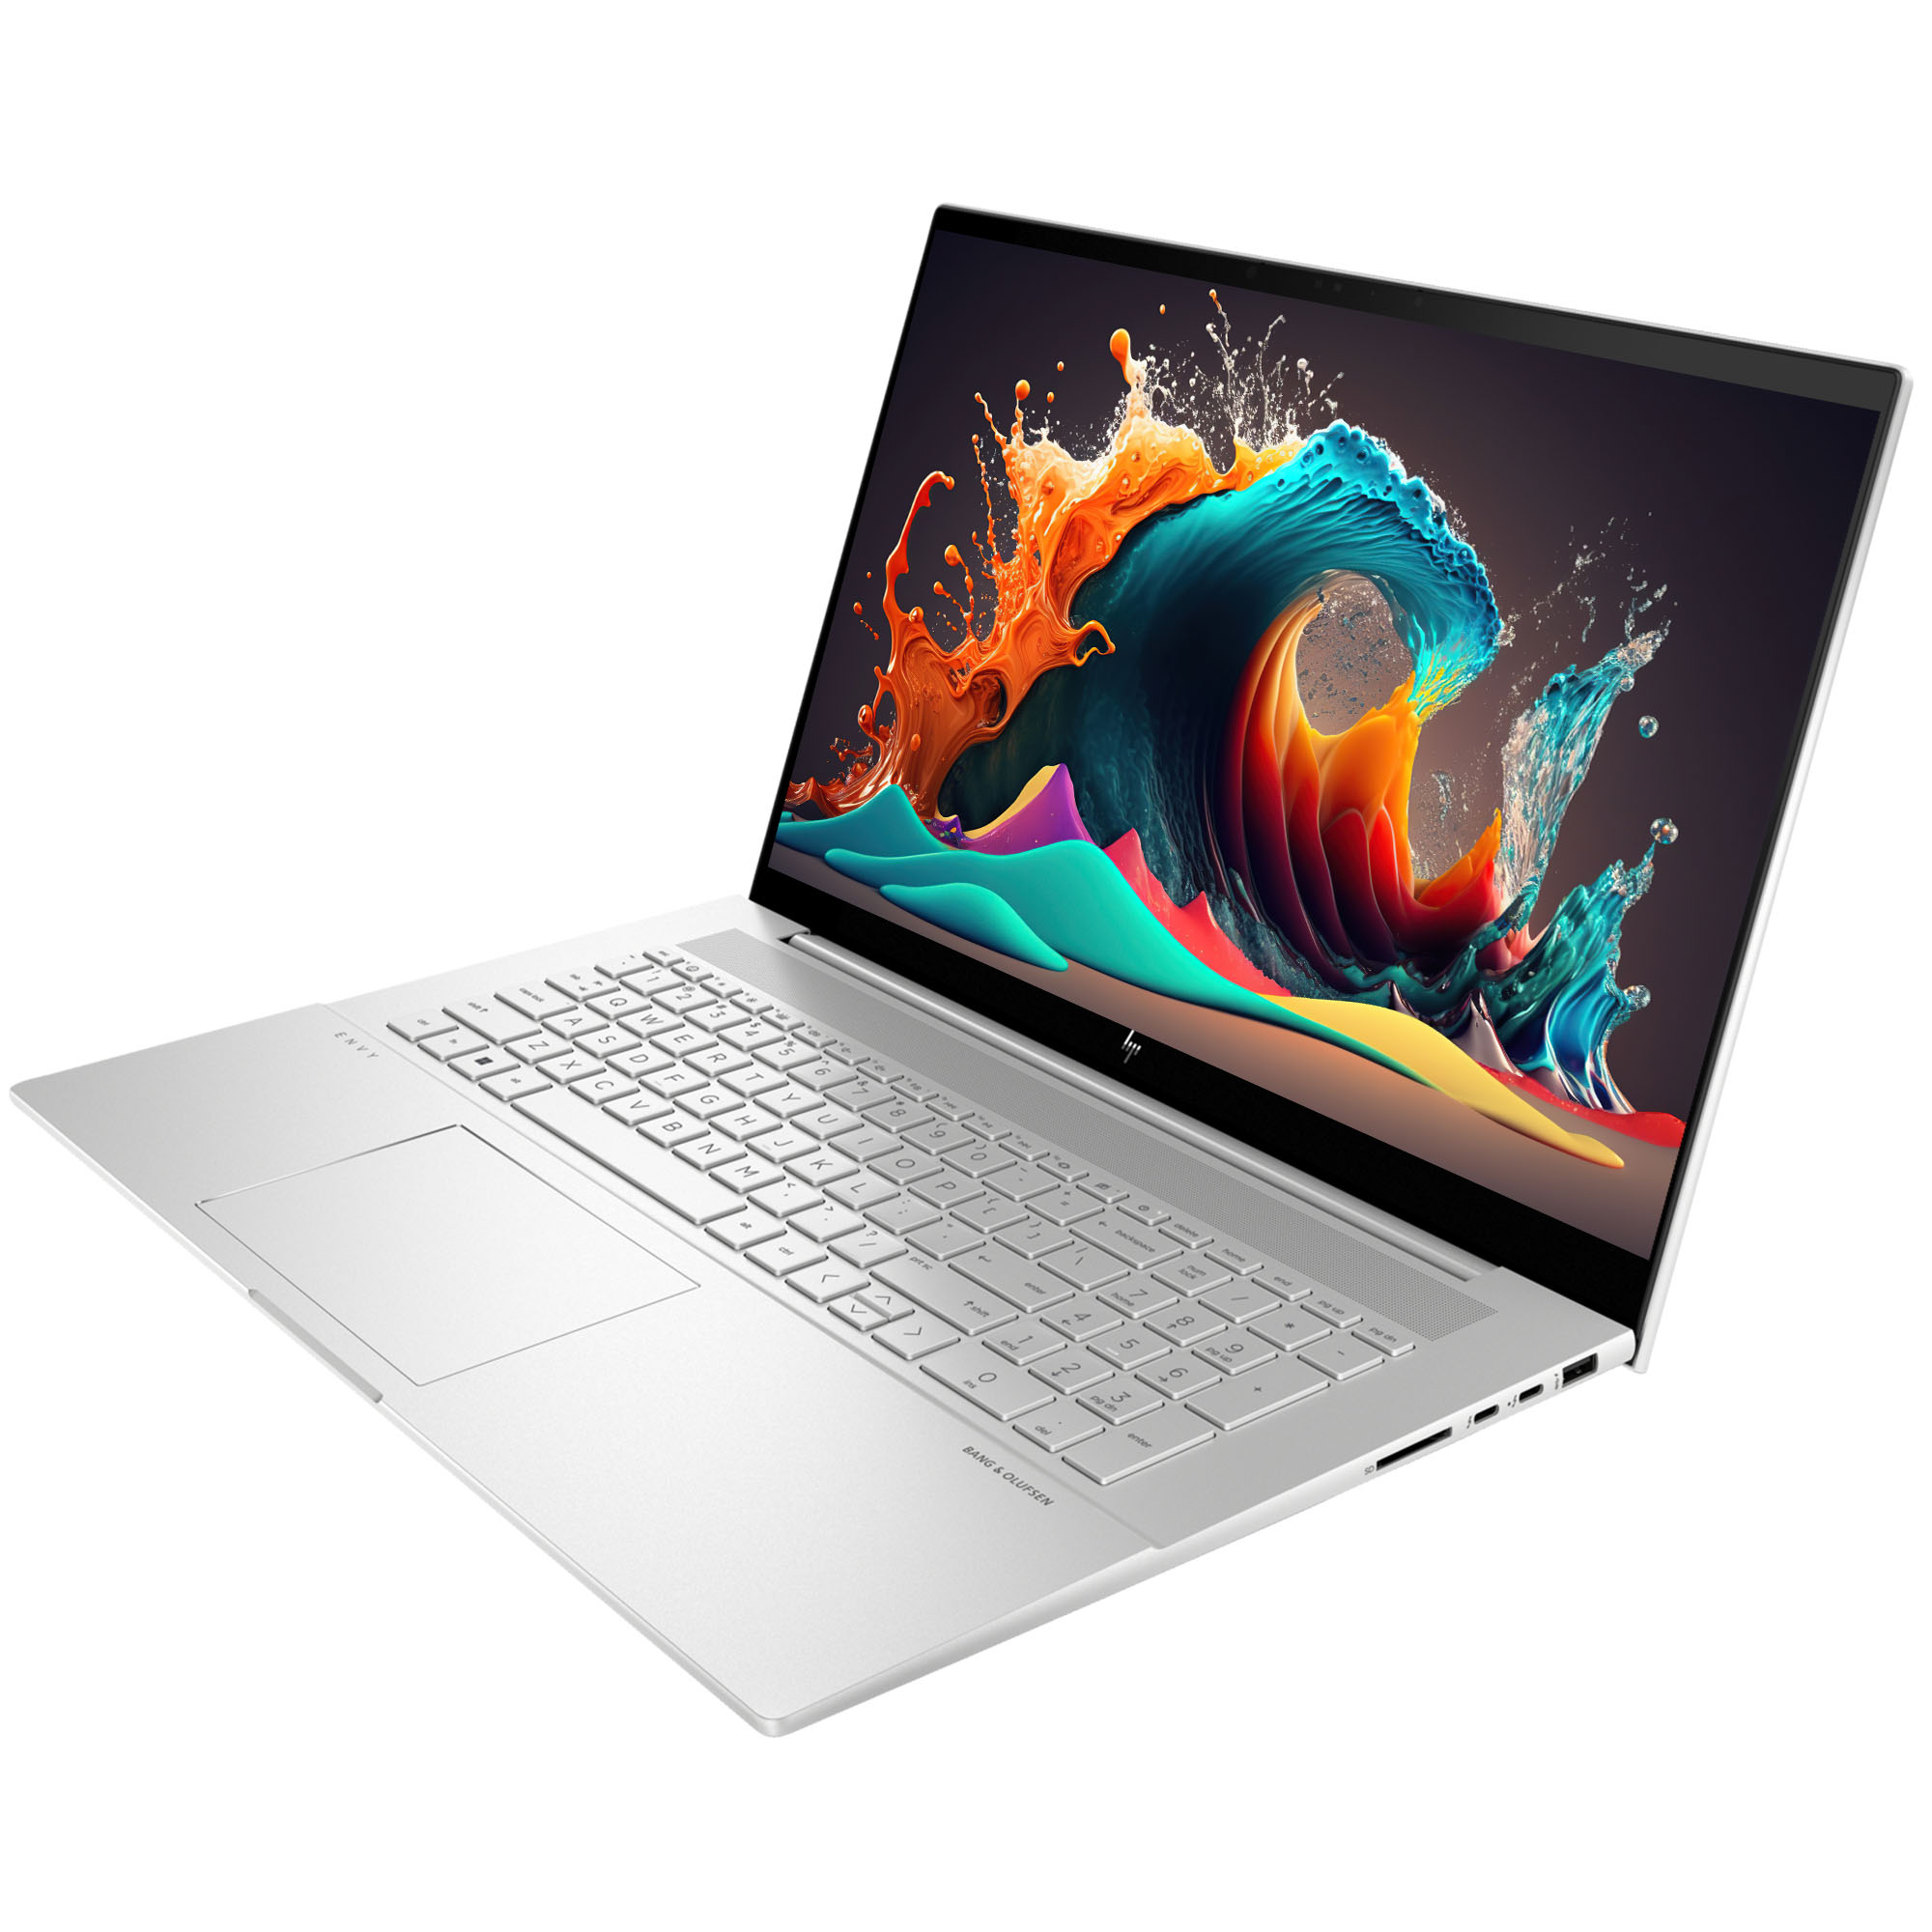 HP Envy 17 17.3" FHD Touchscreen [Windows 11 Pro] Business Laptop, Intel 12-Core i7-1260P, 32GB DDRR4 RAM, 2TB PCIe SSD, Iris Xe Graphic, Backlit KB, Wi-Fi6, Bluetooth 5.3, w/Office Accessories - image 3 of 6